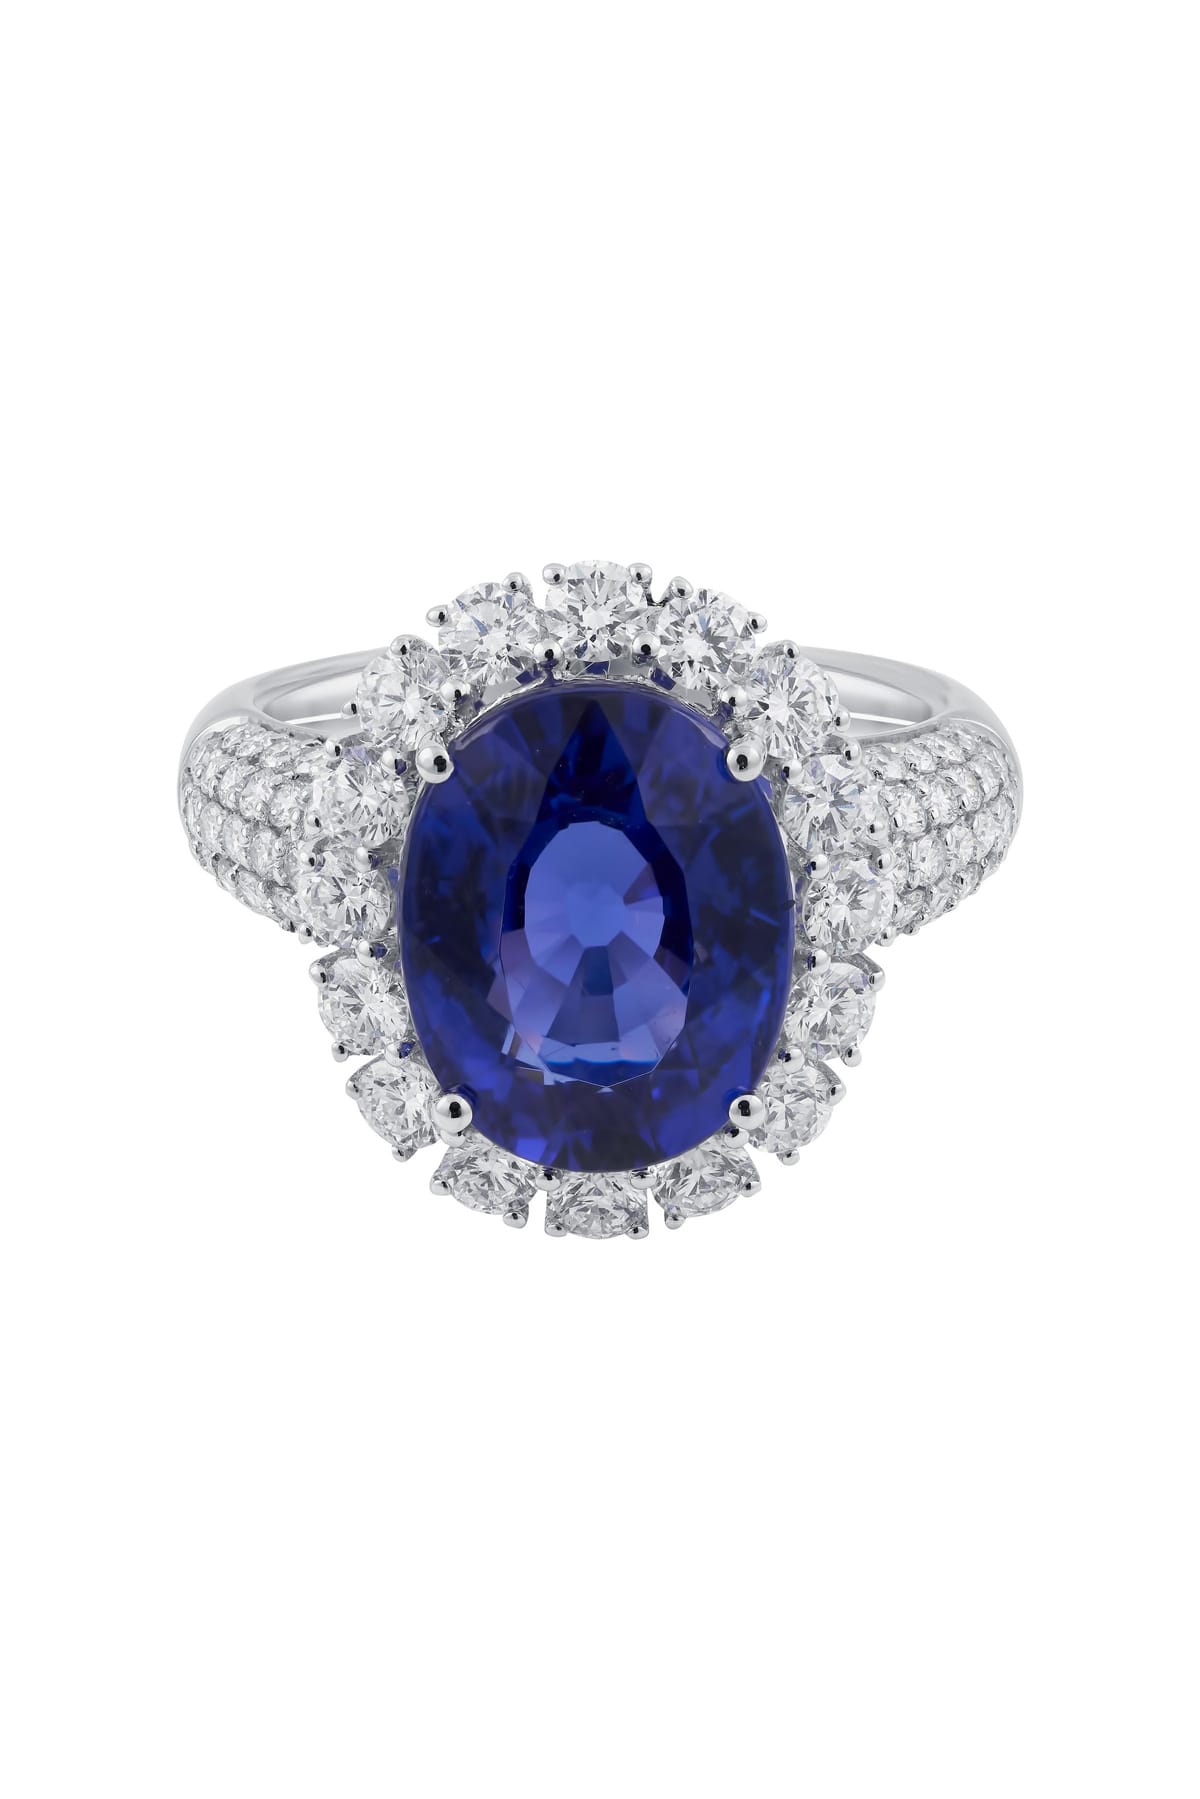 6.05ct Oval Tanzanite and Diamond Ring set in 18ct White Gold available at LeGassick Diamonds and Jewellery Gold Coast, Australia.